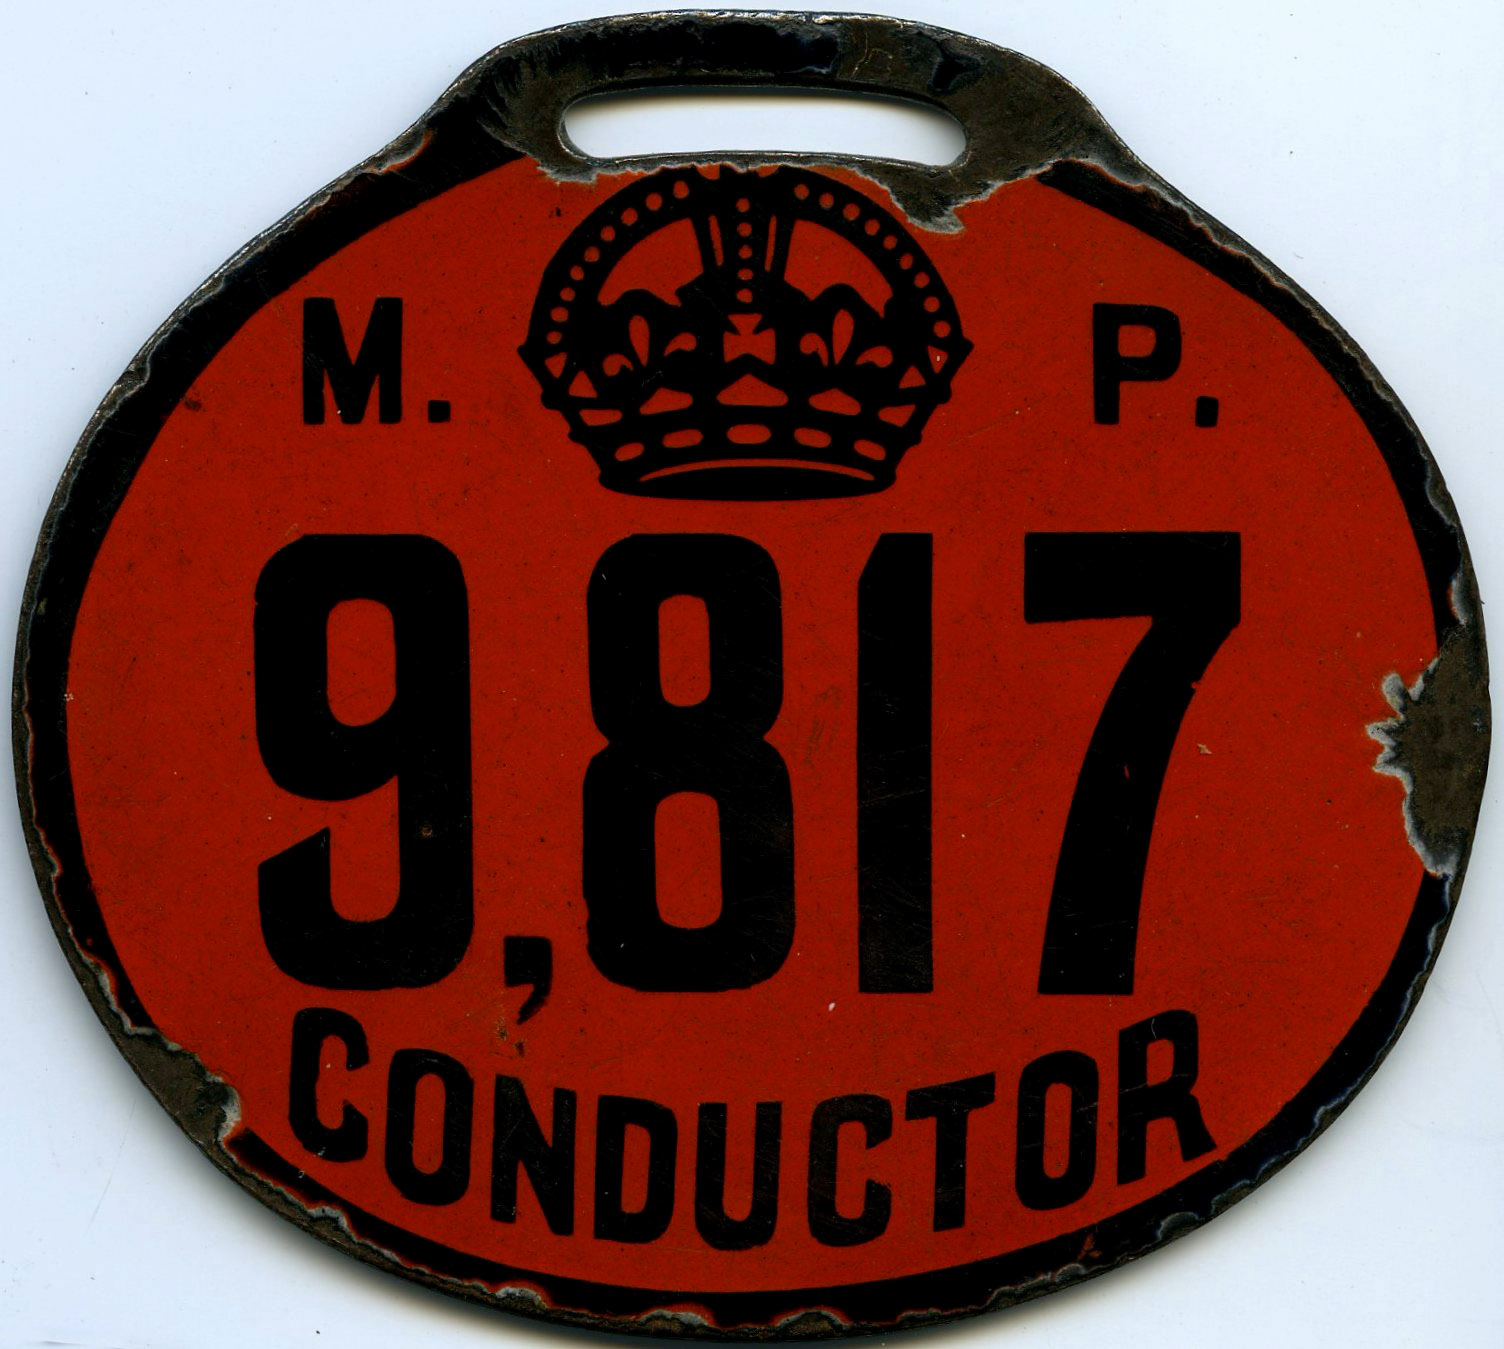 London bus conductor's ENAMEL LICENCE BADGE of the type issued form 1906 onwards and used until